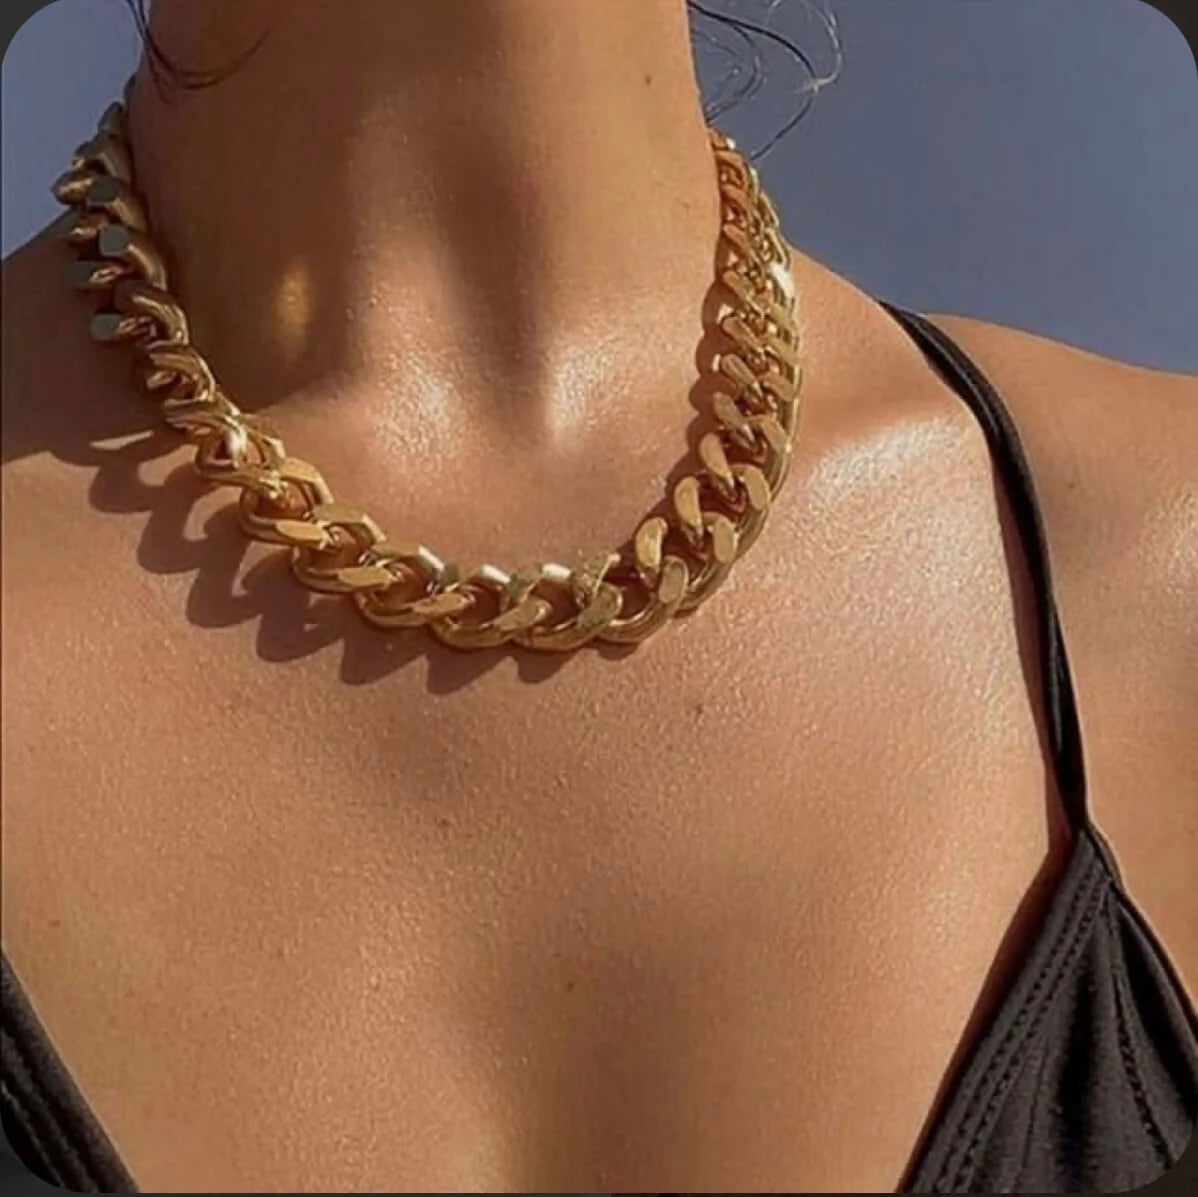 STAR CHUNKY CHAIN NECKLACE